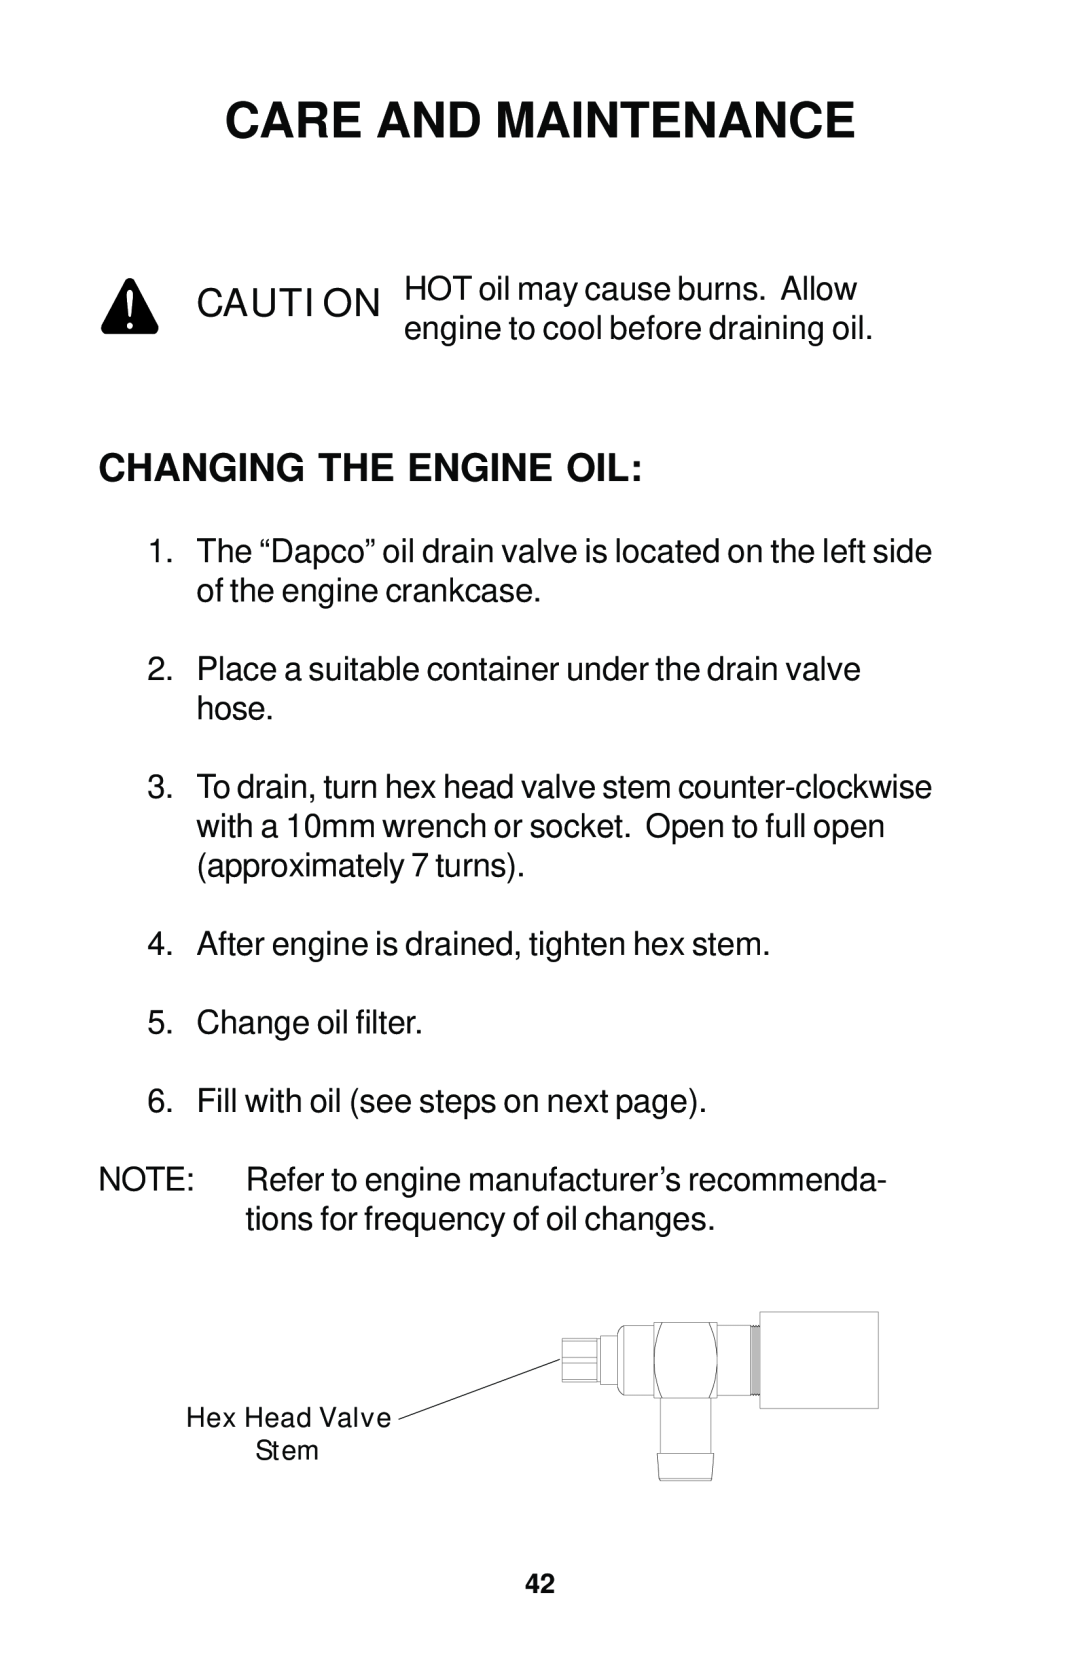 Dixon 17823-0704 manual Changing The Engine Oil, Care And Maintenance 